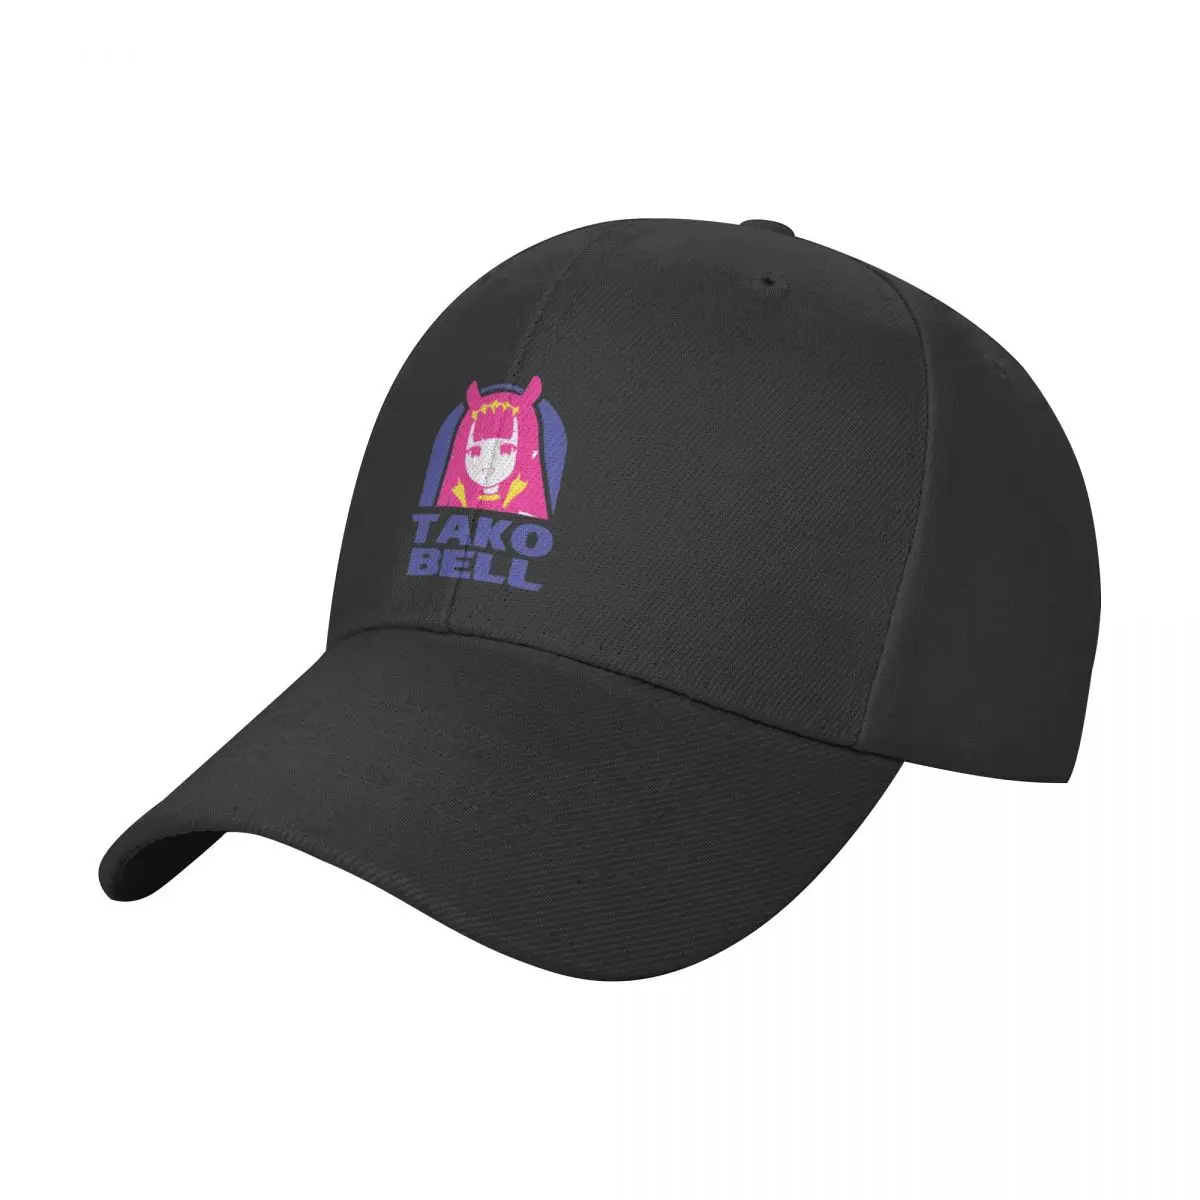 

Hololive EN Ina TAKO BELL Logo ParodyCap baseball cap new hat new in the hat Rugby caps for women Men's